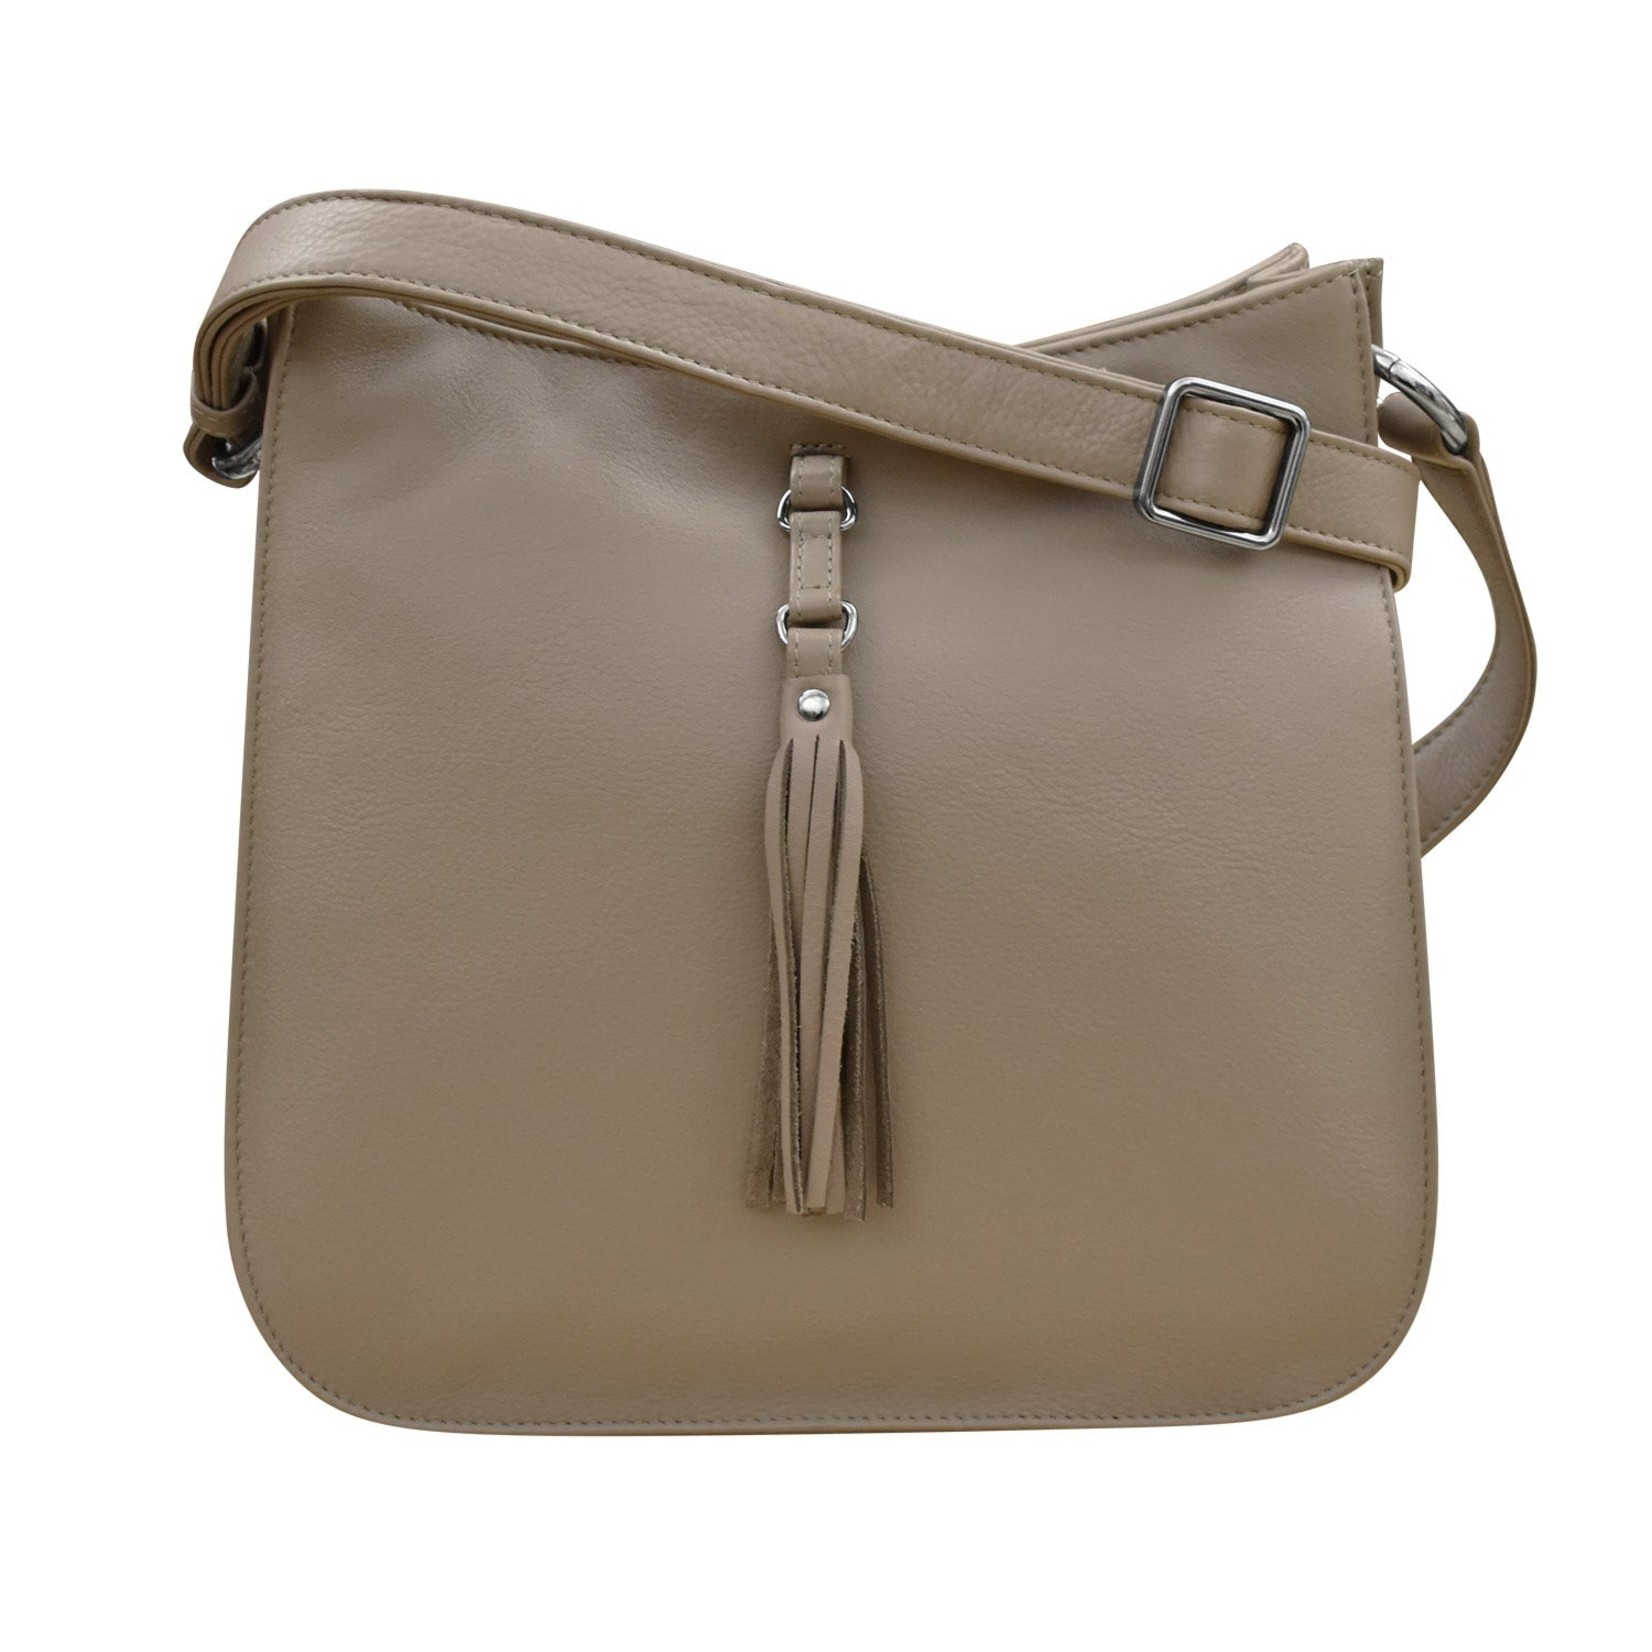 Leather Handbags and Accessories 6888 Taupe - Feed Bag with Tassel